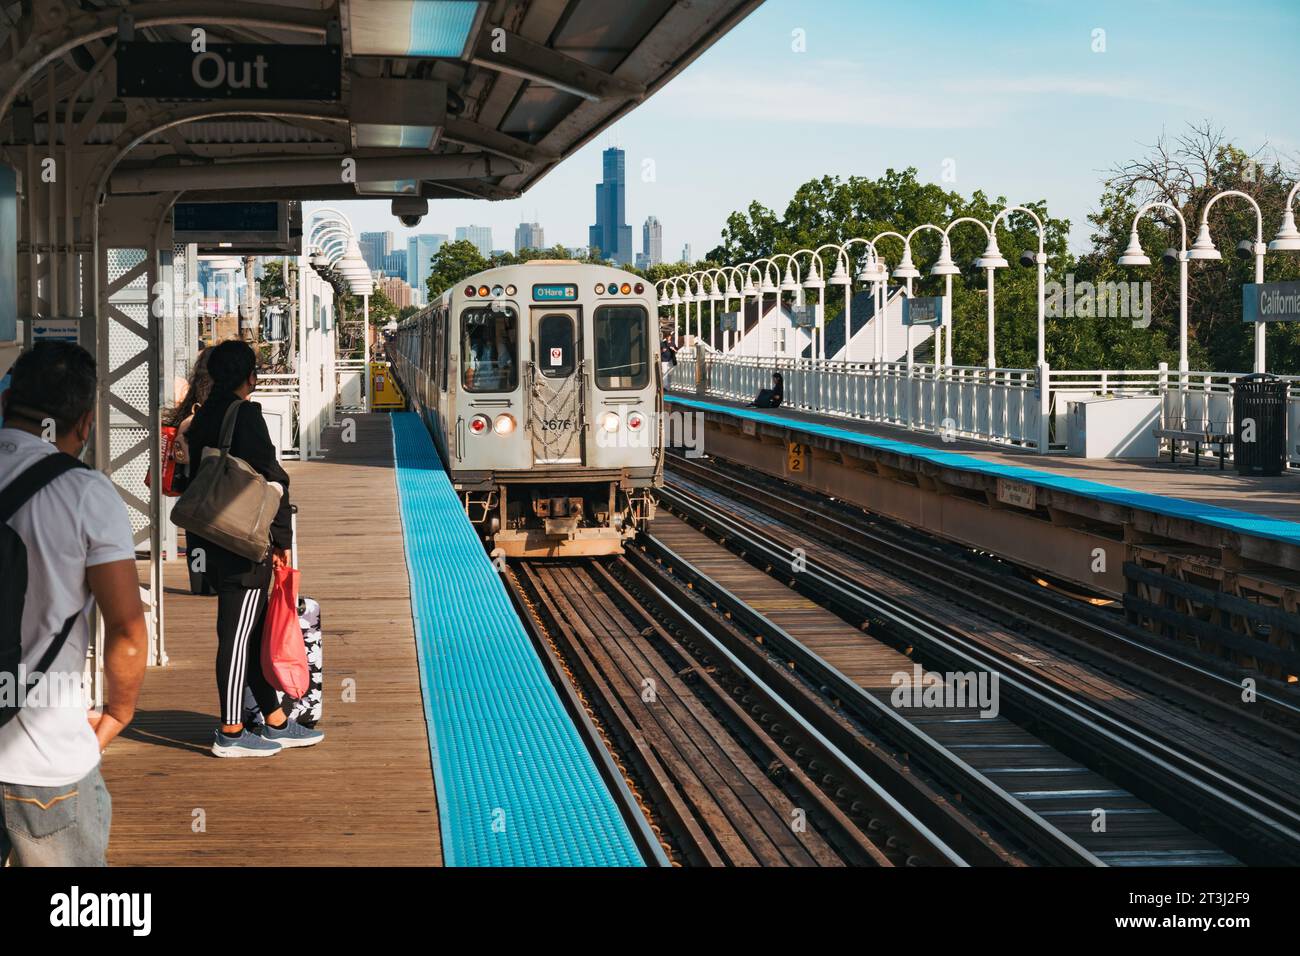 a train on Chicago's Blue Line elevated metro pulls in at California Station Stock Photo